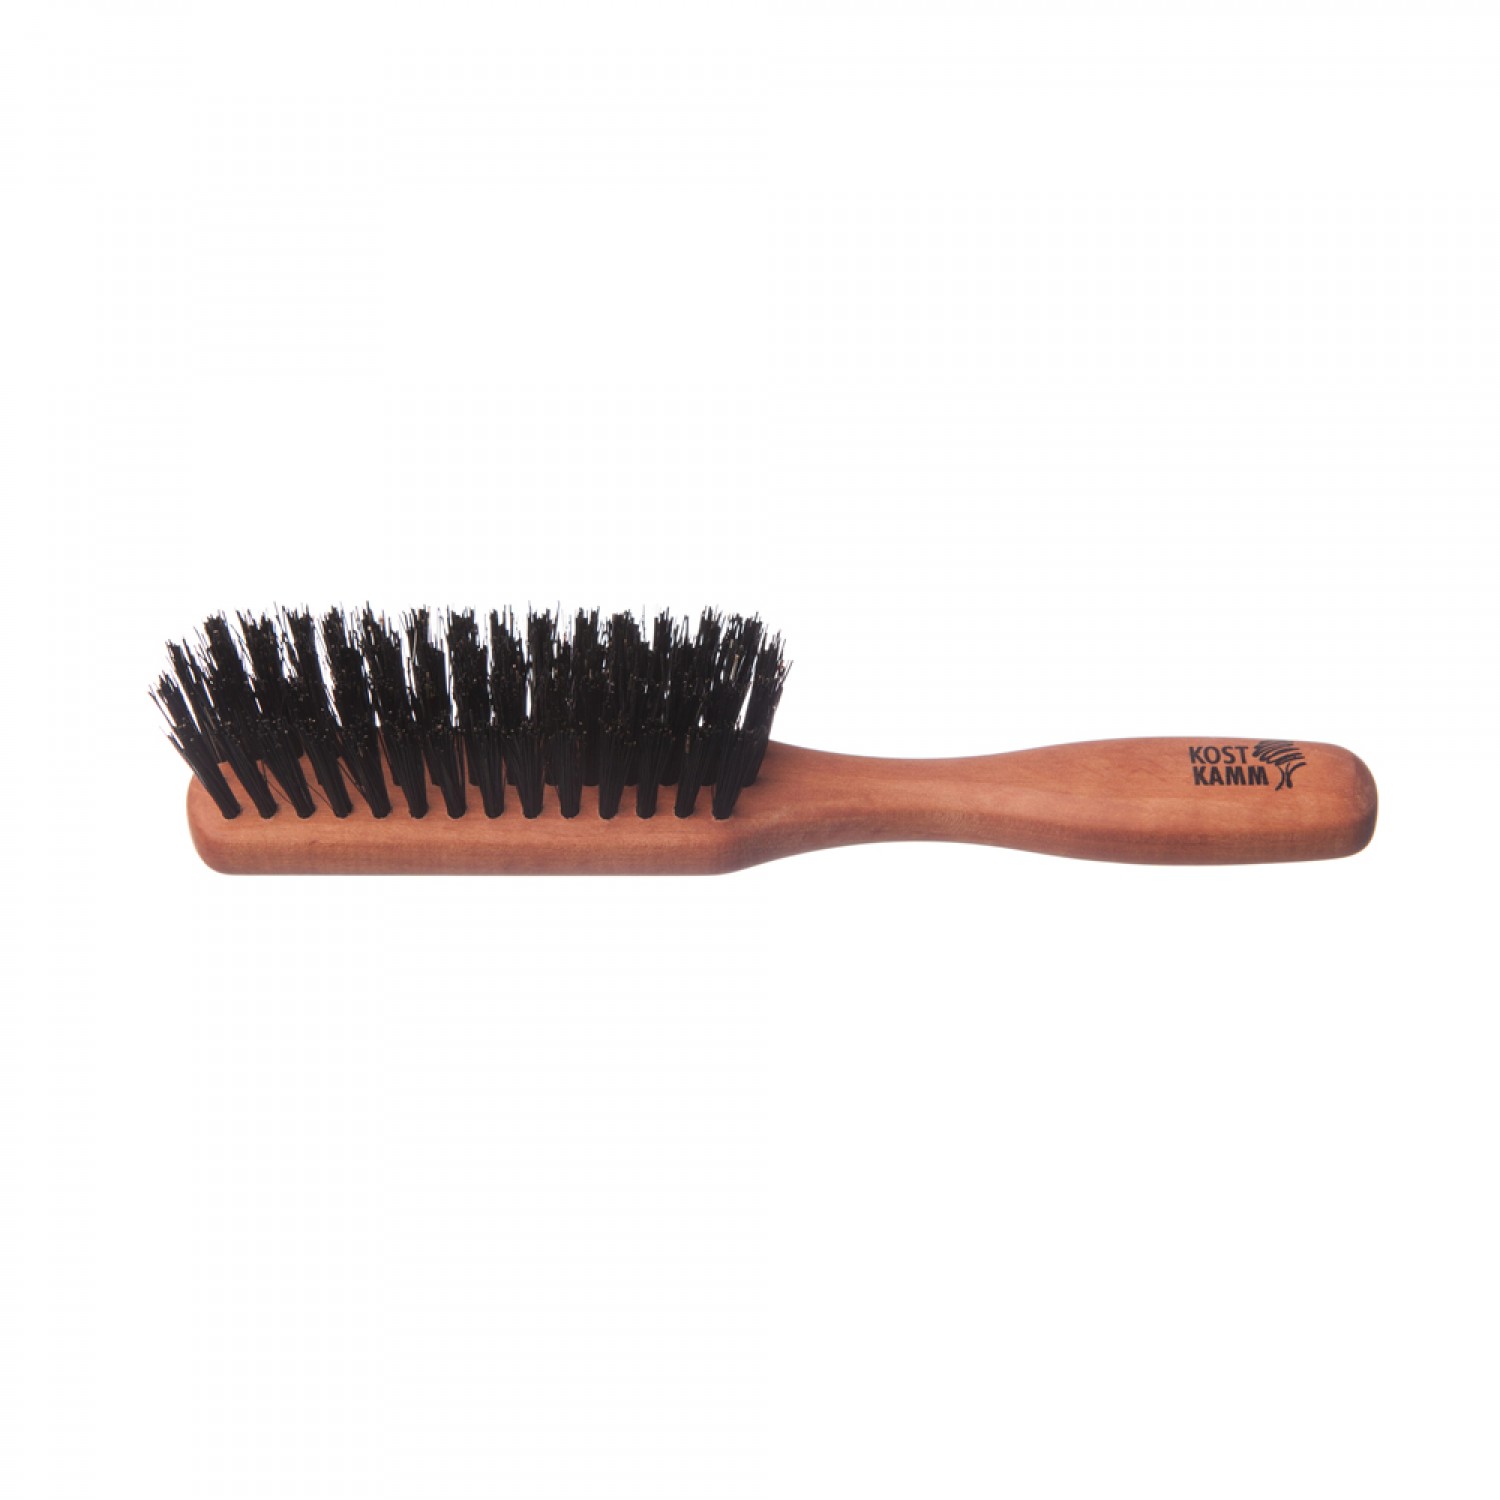 Boar Bristles Hairbrush and Pear Wood for Pocket | Kost Kamm